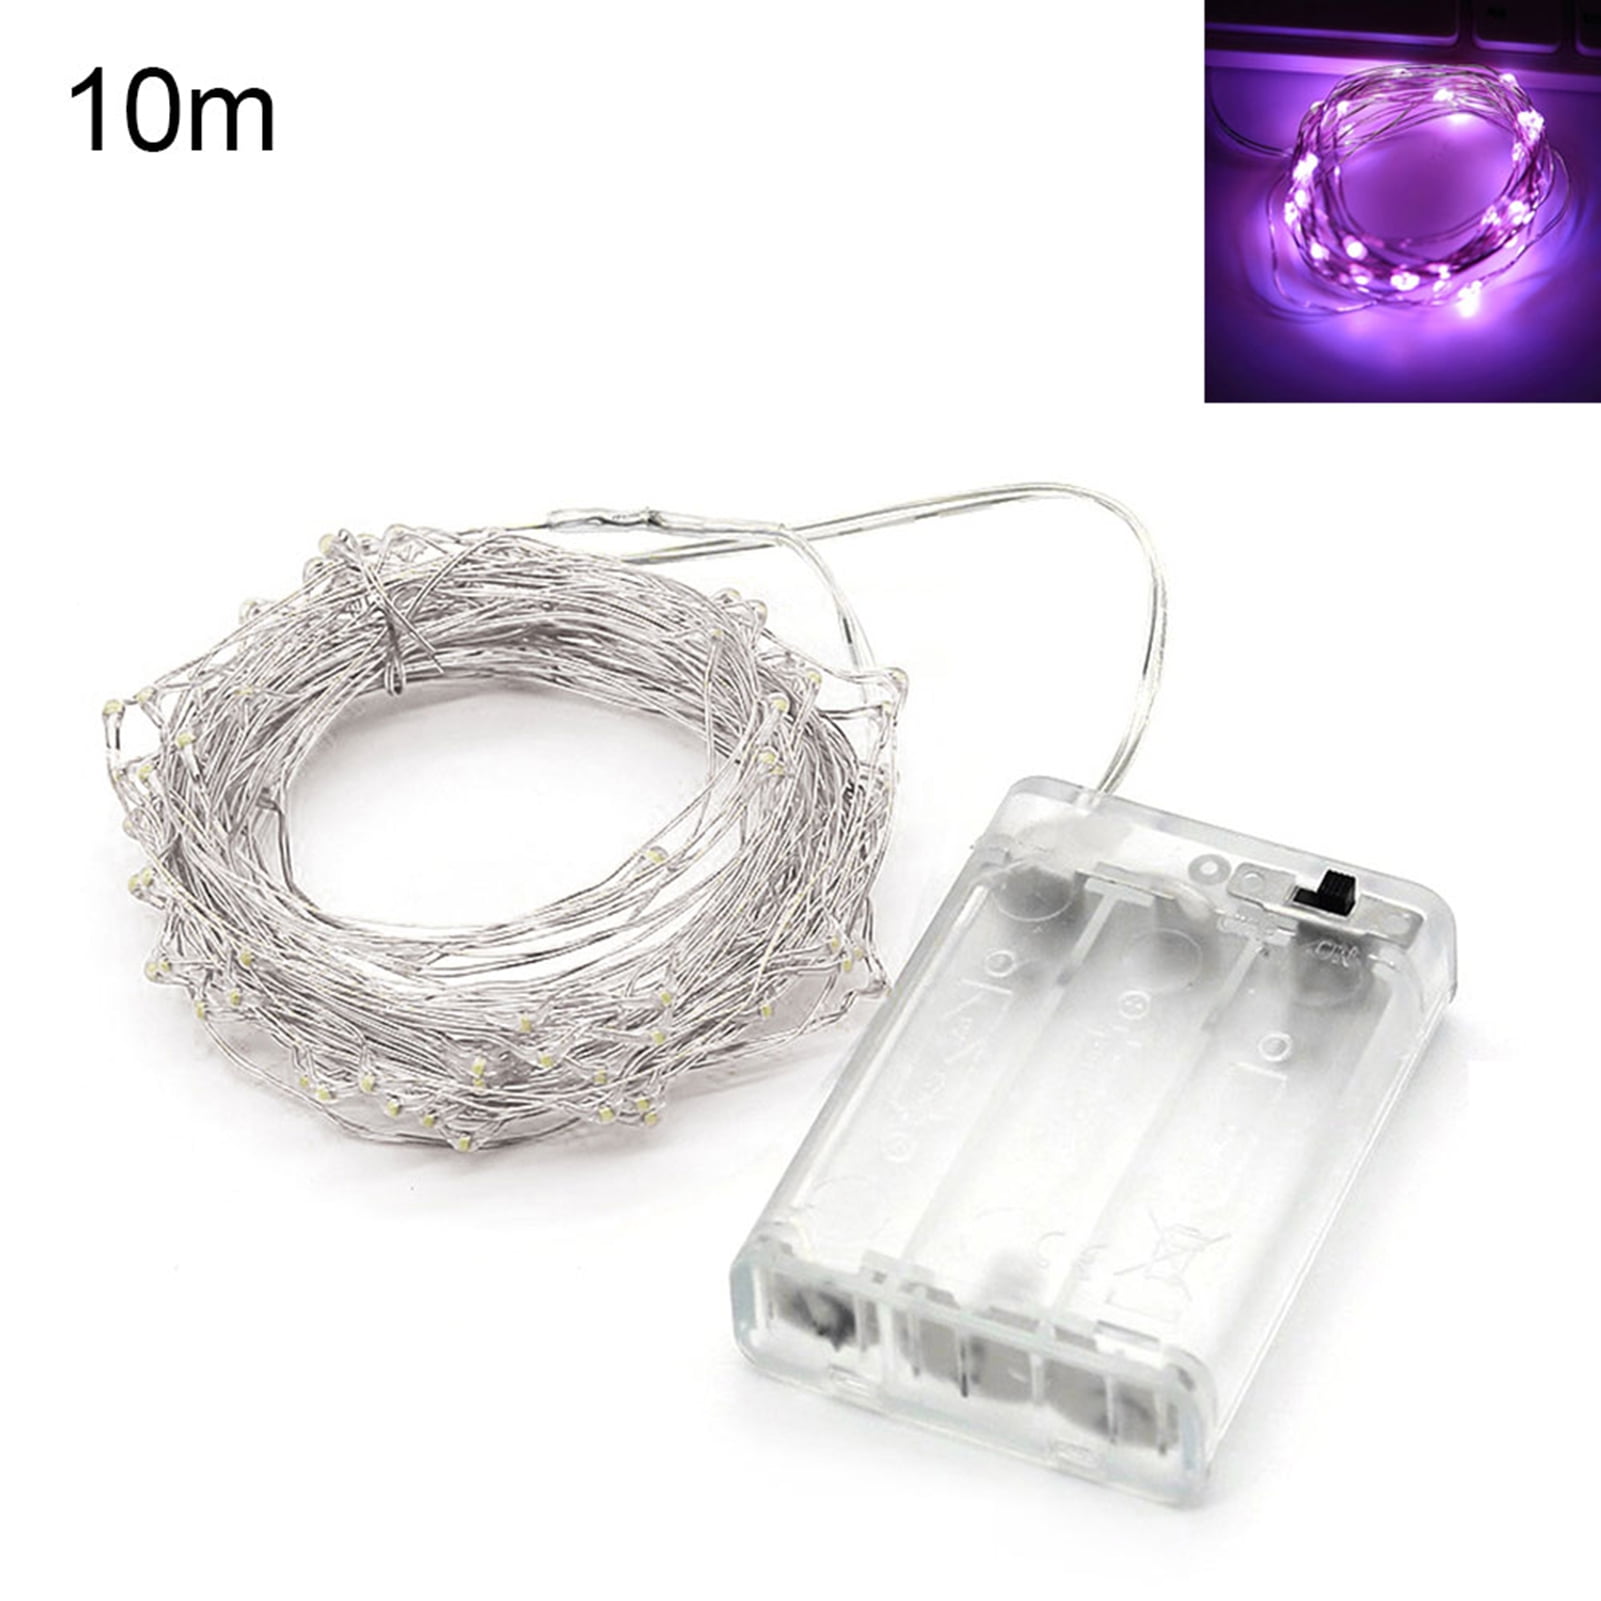 20/50/100 LEDs USB/Battery Operated Copper Wire String Fairy Lights Décor 5/10M 